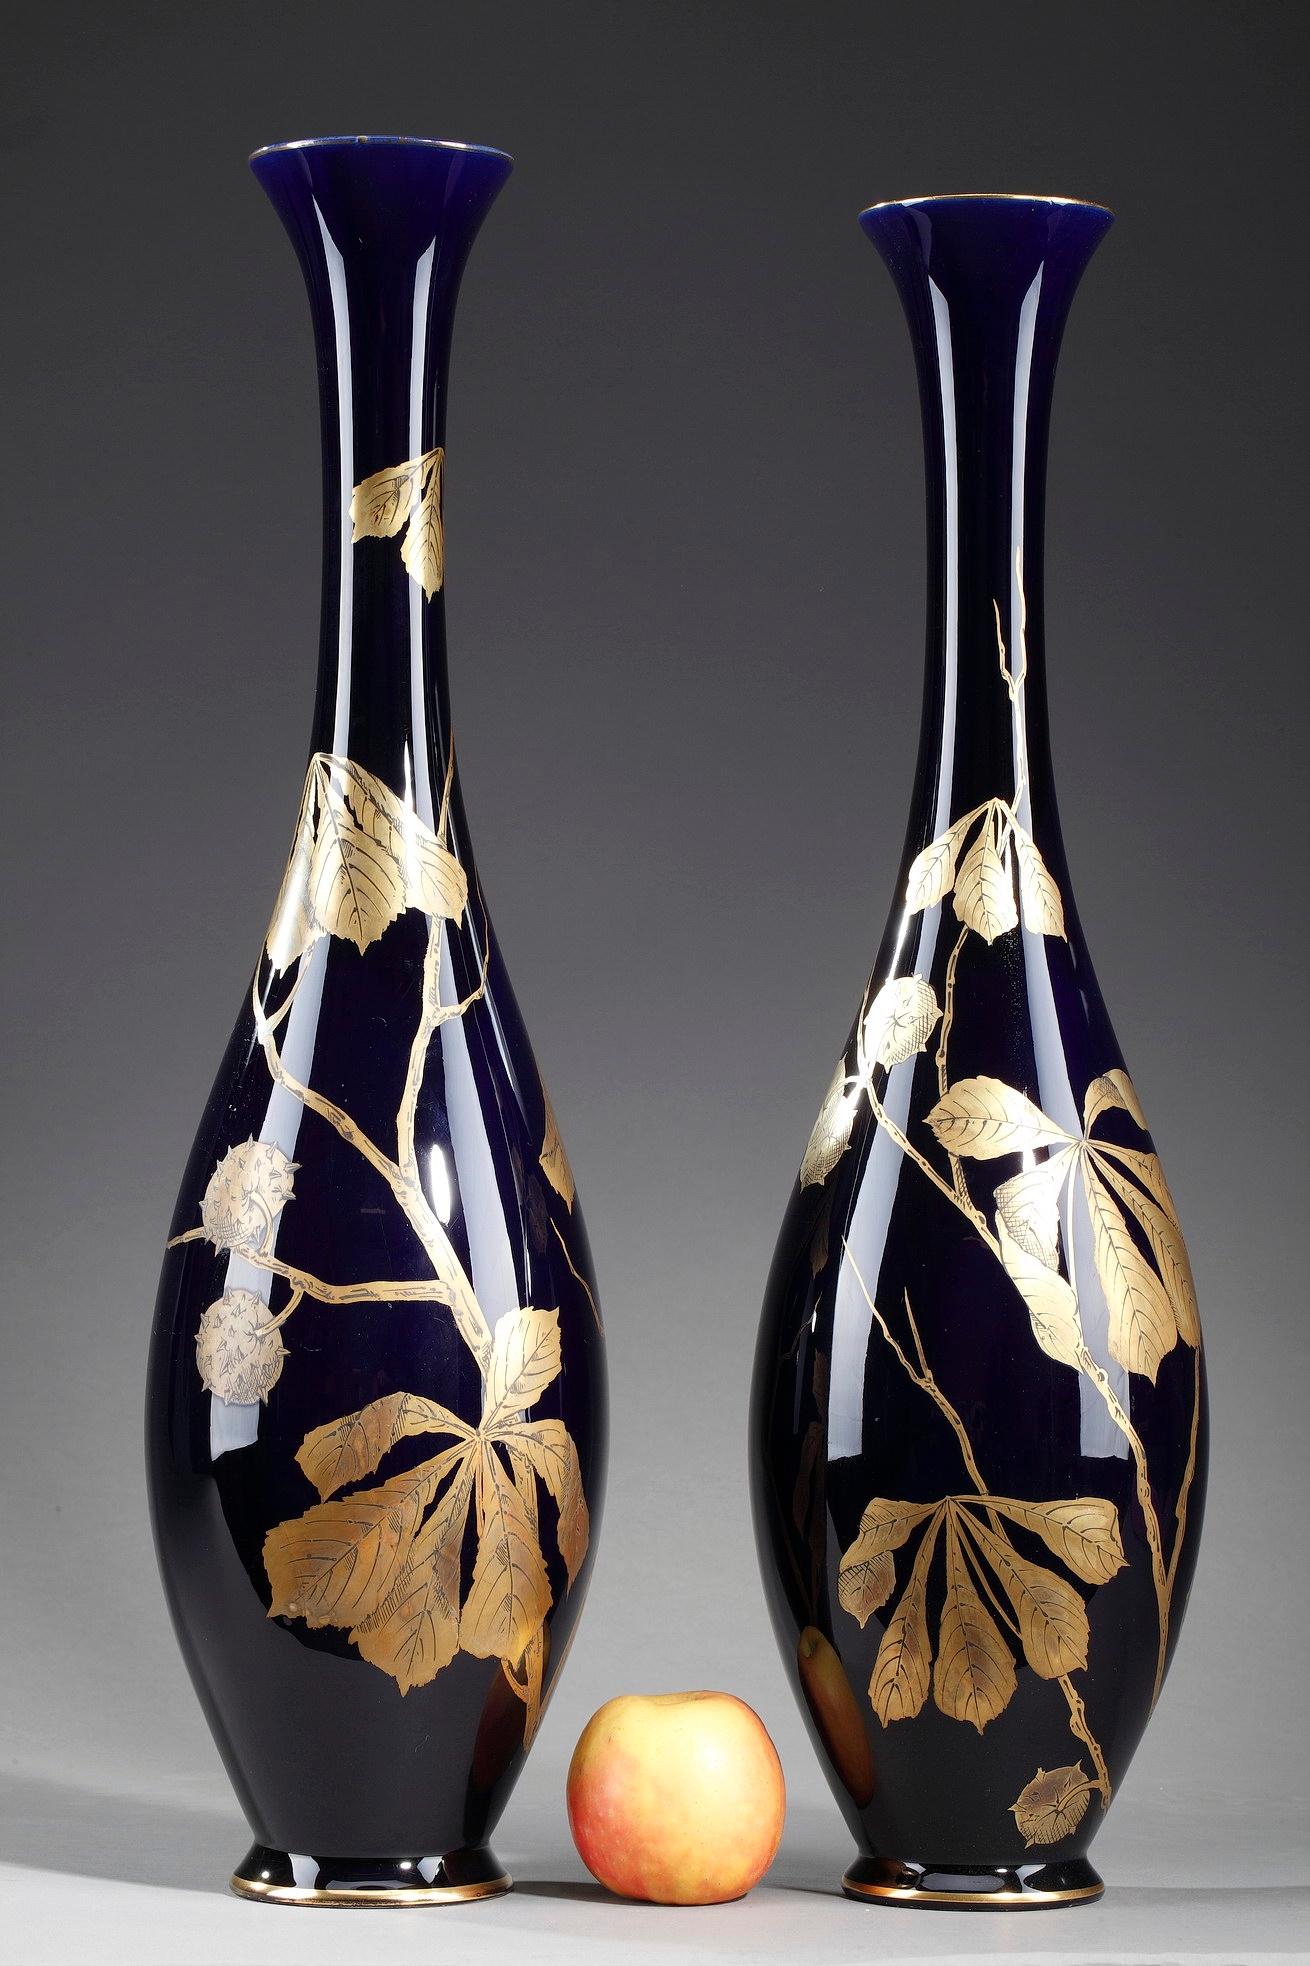 Two porcelain vases intricately decorated with chestnut branches and chestnuts in their bugle in gold on bleu de Tours background. The motif covering the neck and the belly of each vase, is typical of the Art Nouveau decorations of the French